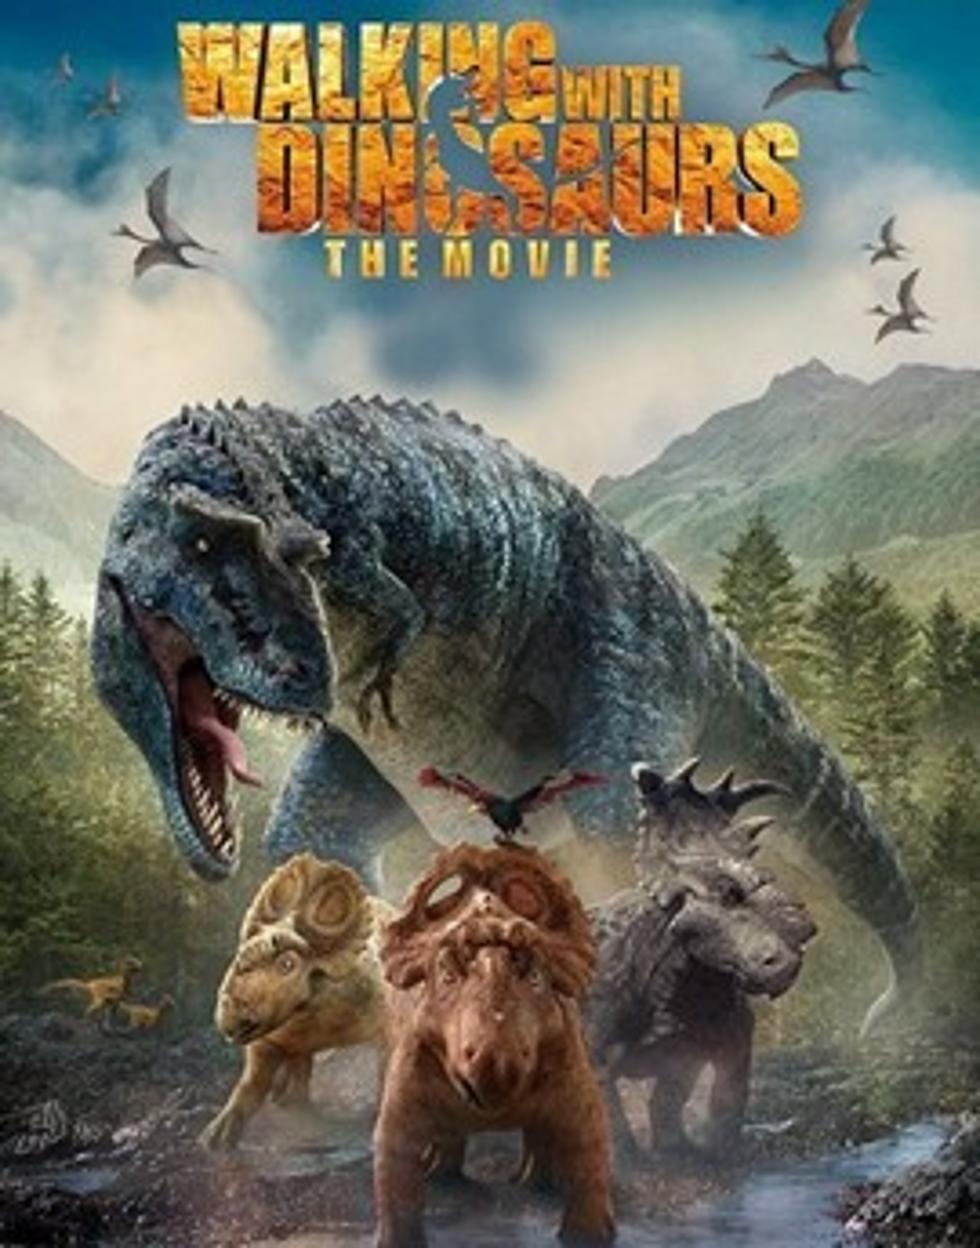 Go See The Movie “Walking With Dinosaurs” Today Through Thursday for $1